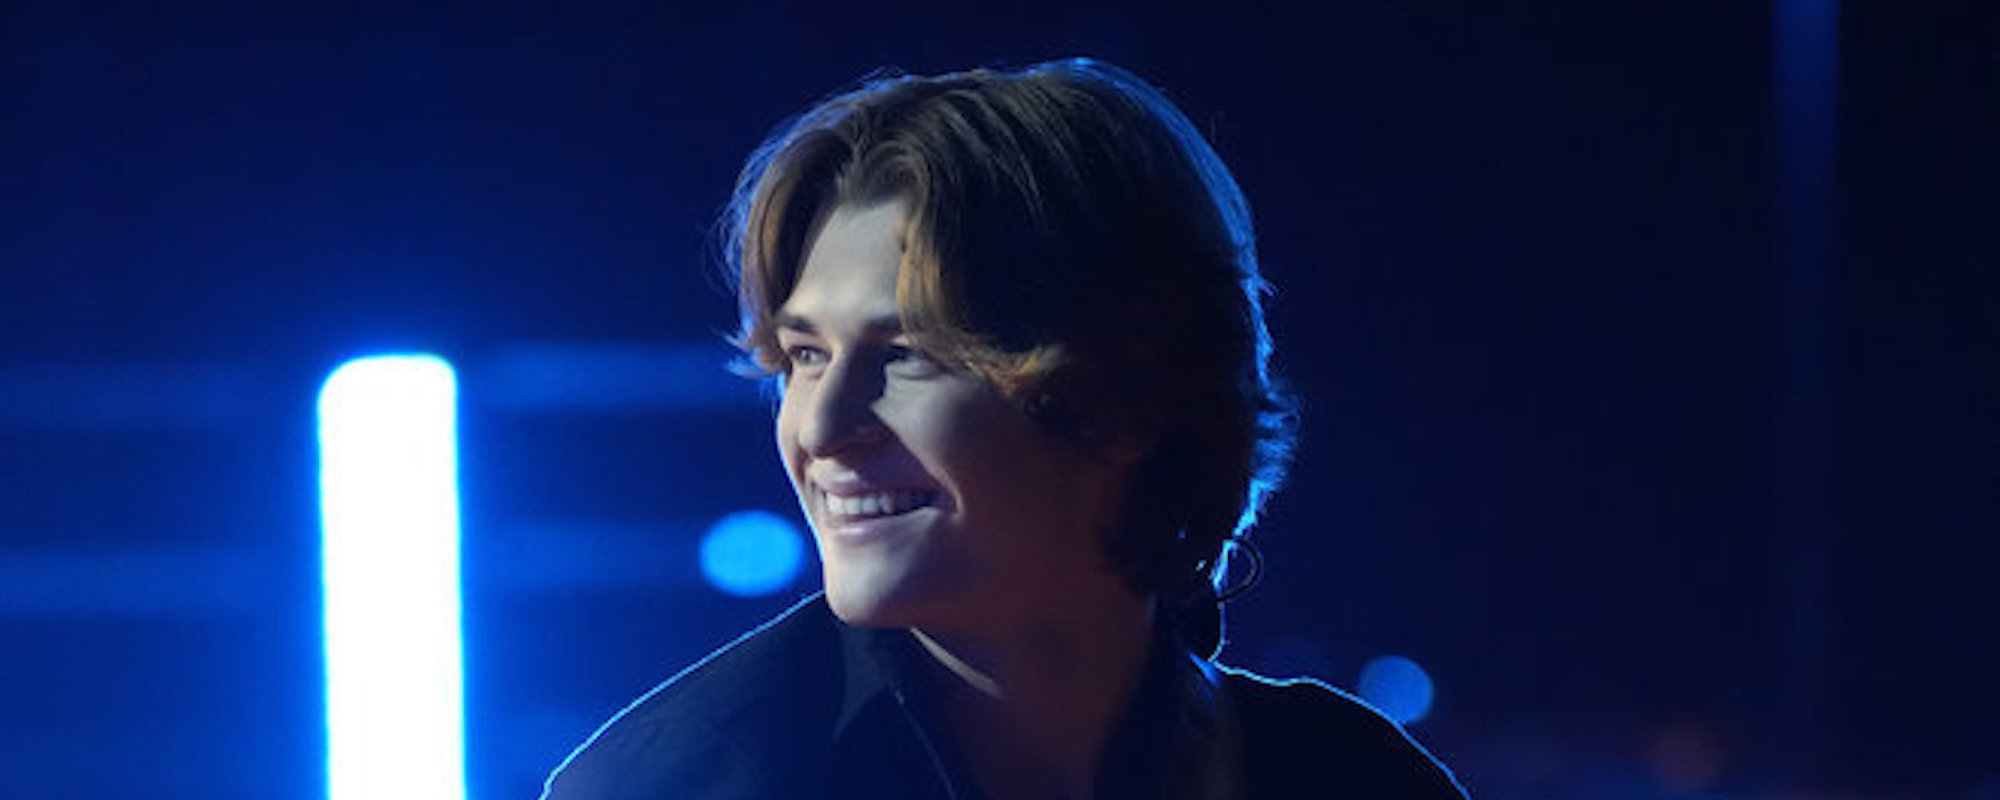 Brayden Lape Connects to Kane Brown’s “Homesick” for Top 10 Performance on ‘The Voice’